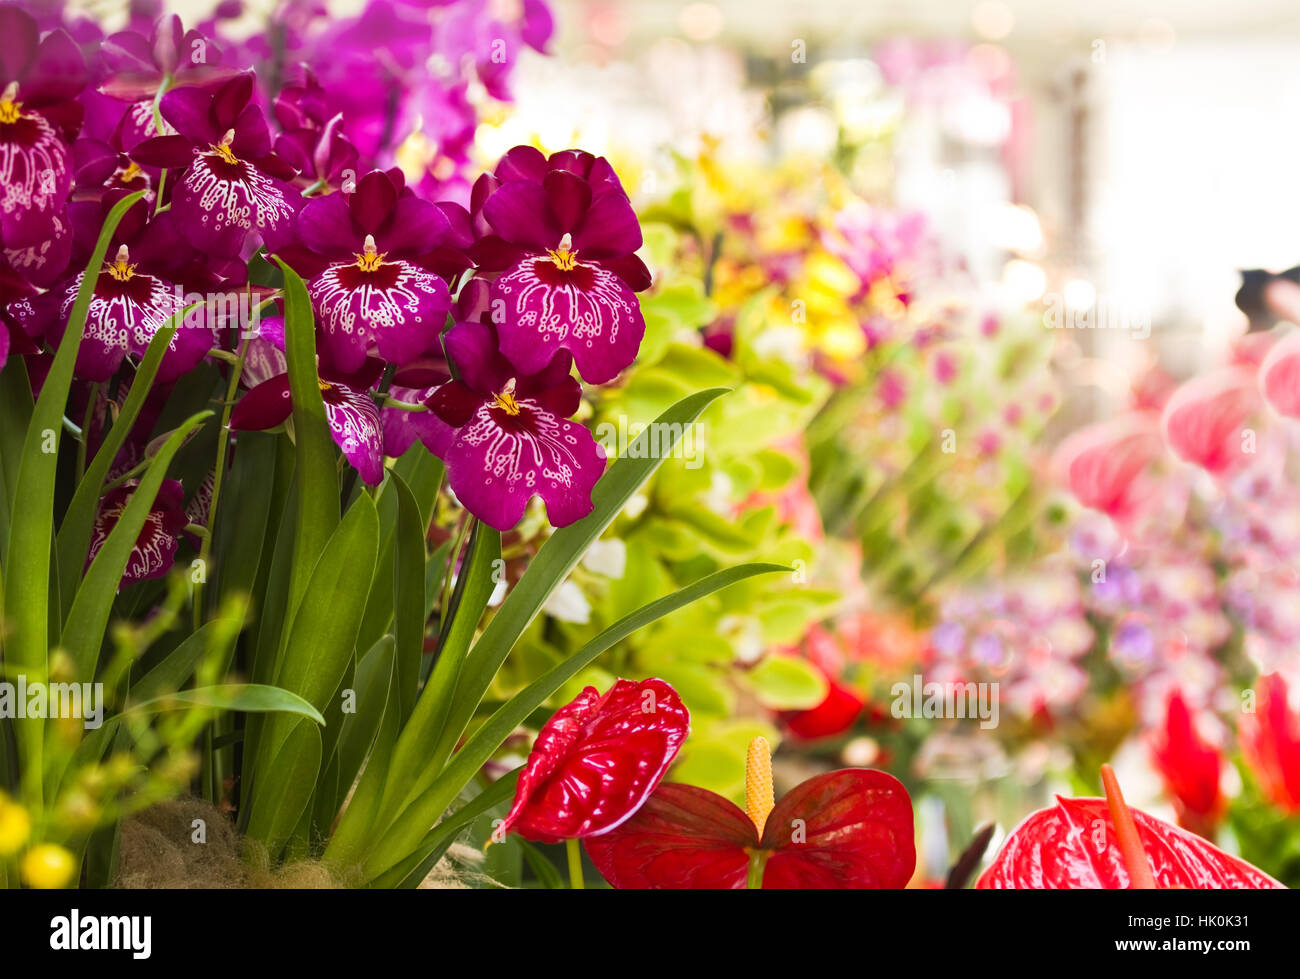 flower, plant, flowers, colorful, orchid, close, indicate, show, macro, Stock Photo